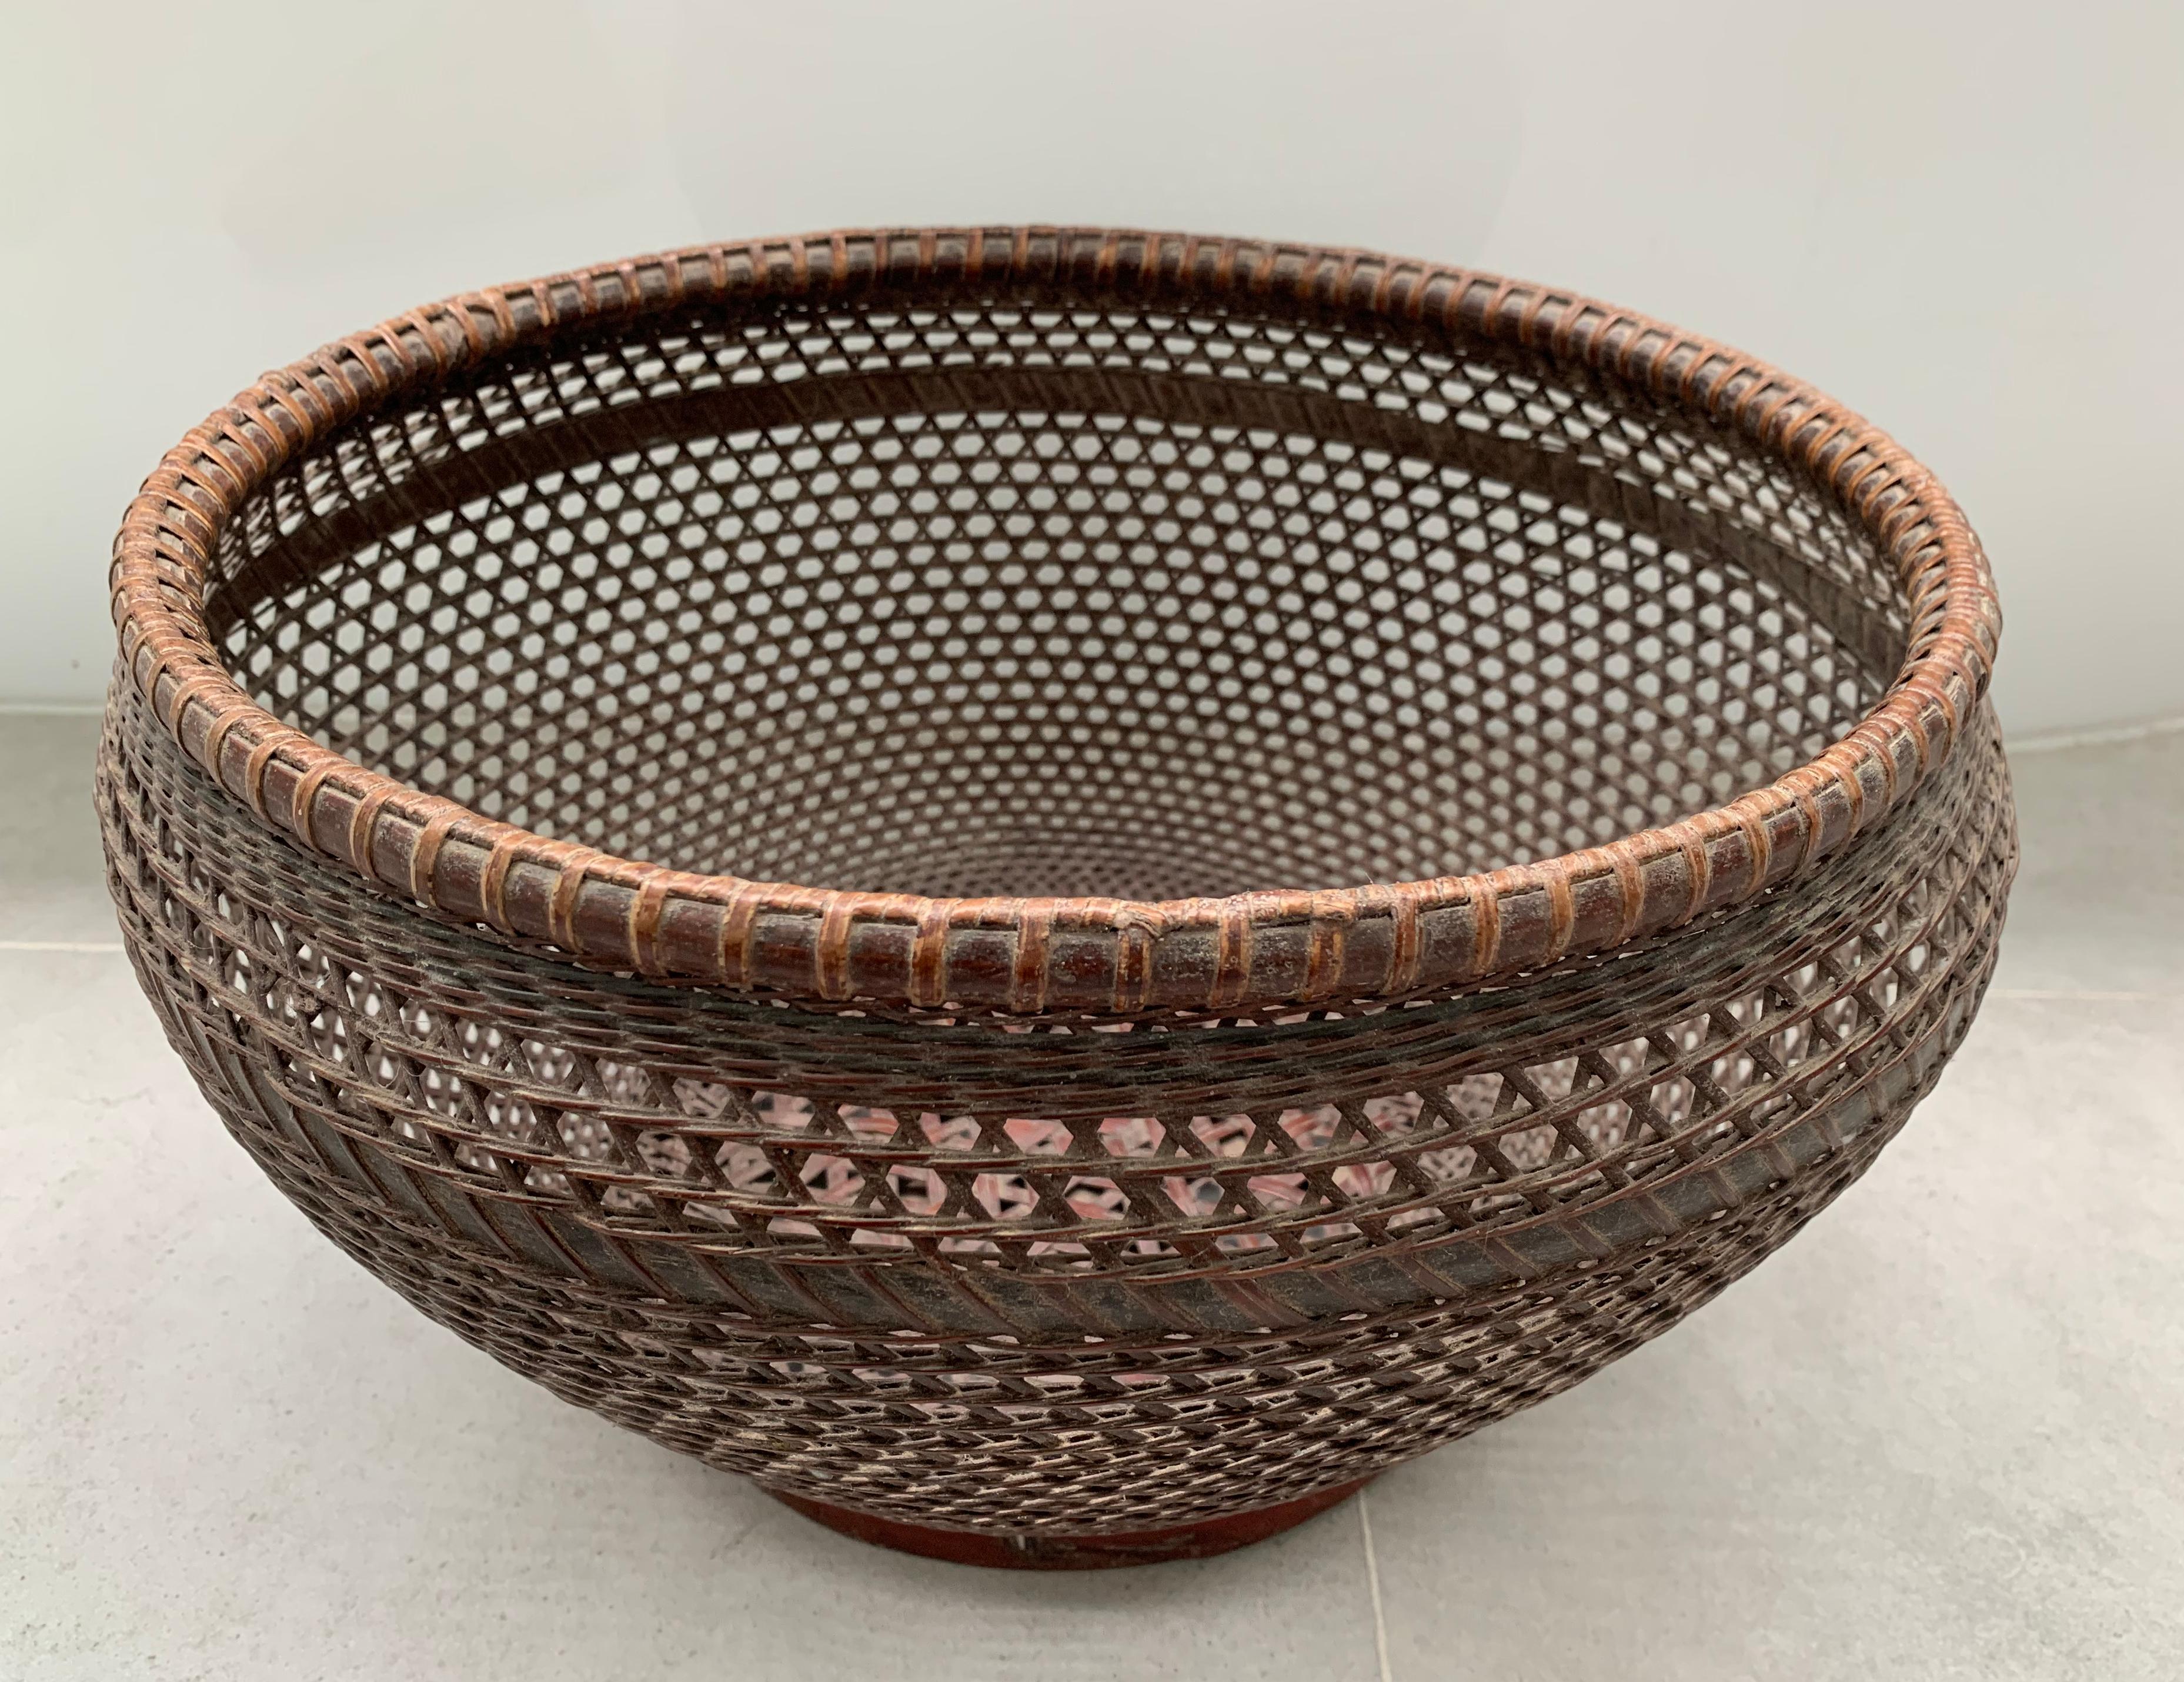 Hand-Crafted Chinese Basket Pair Hand-Woven Rattan with Red Wood Base, Early 20th Century For Sale